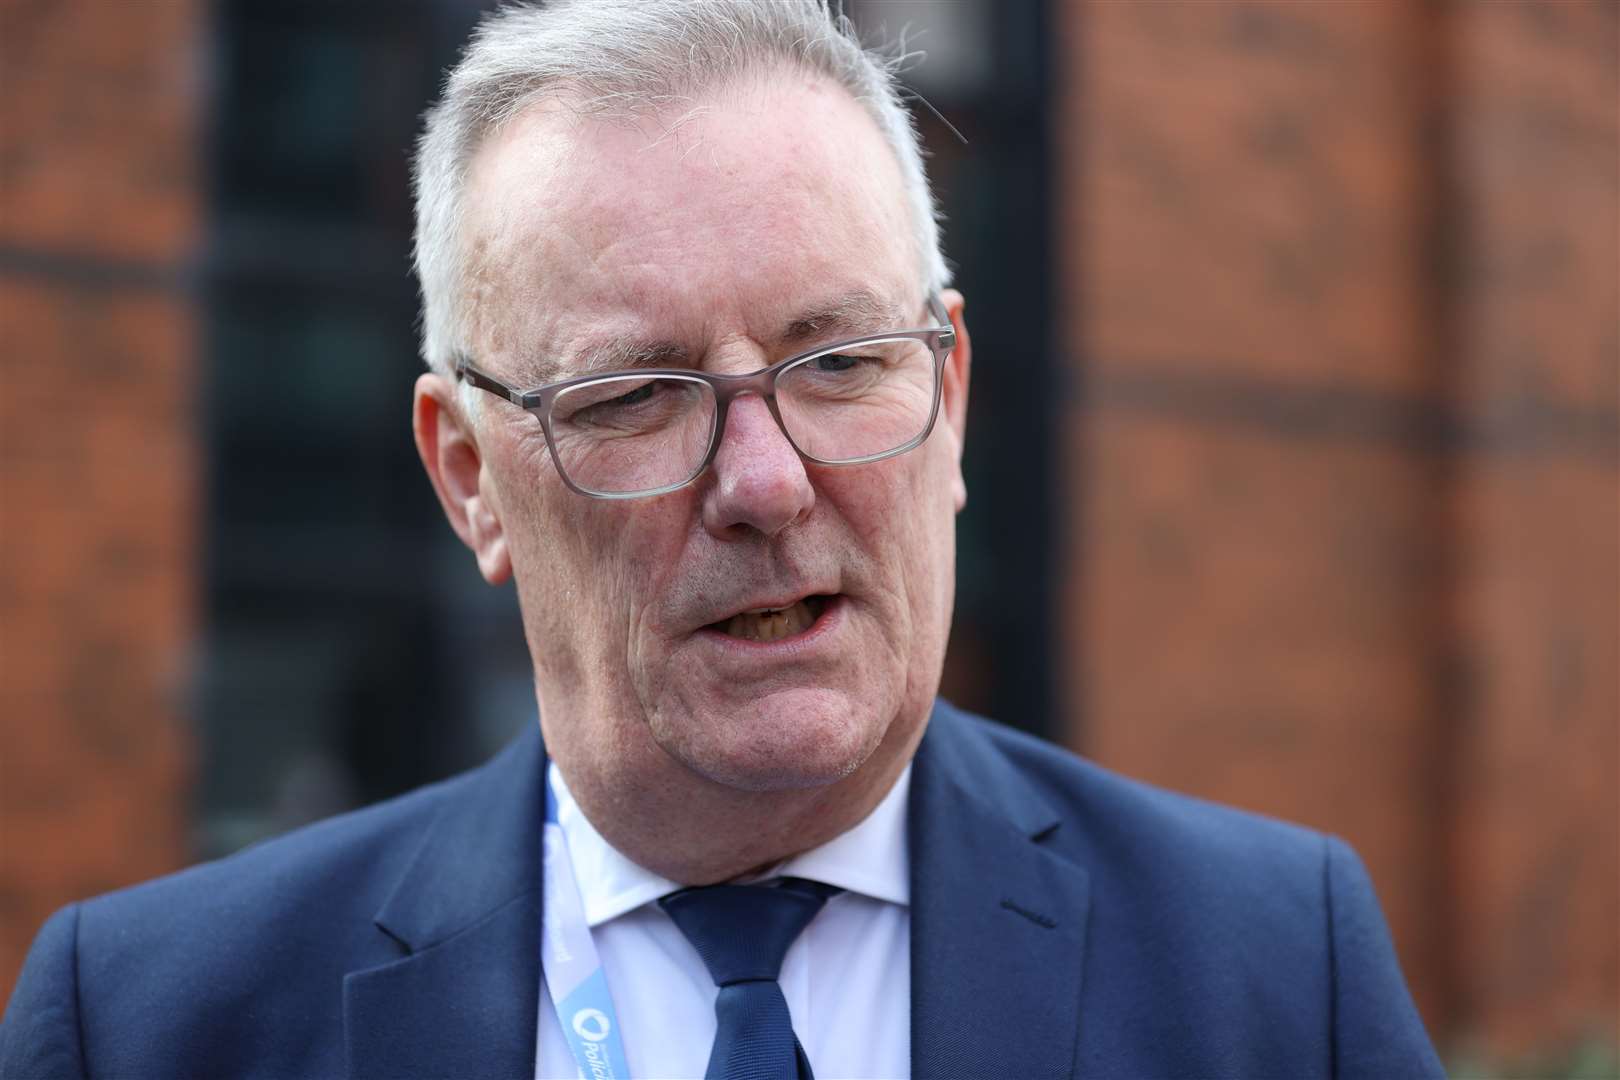 Ulster Unionist Party Policing Board member Mike Nesbitt said officers are worried (Liam McBurney/PA)